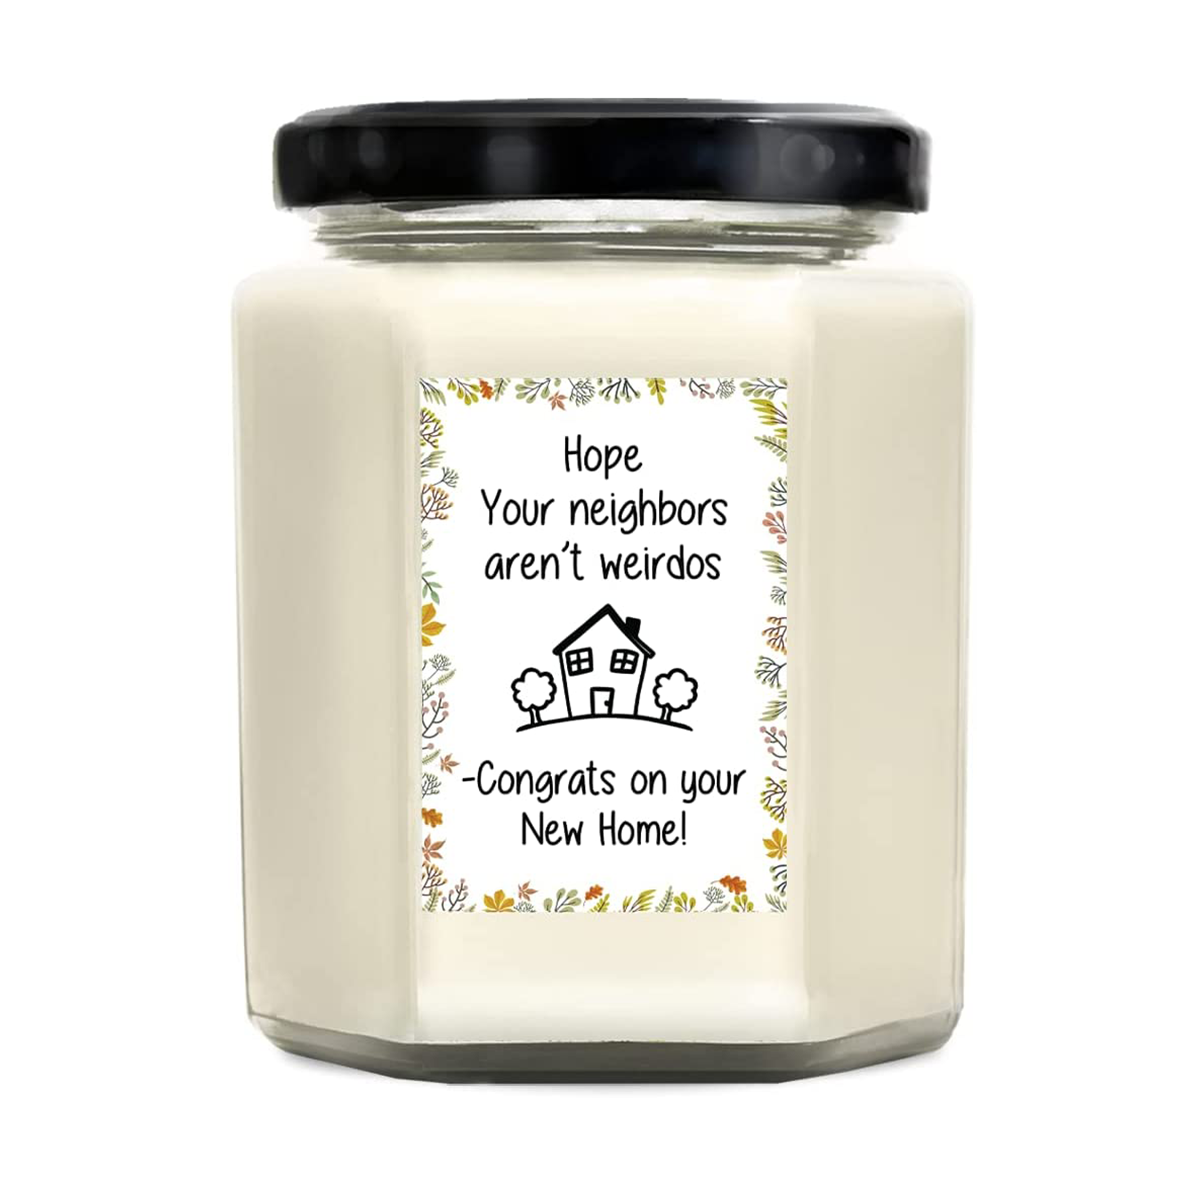 Hope Your Neighbors Aren’t Weirdos - Lavender Candle 8 Oz - Housewaming Gift